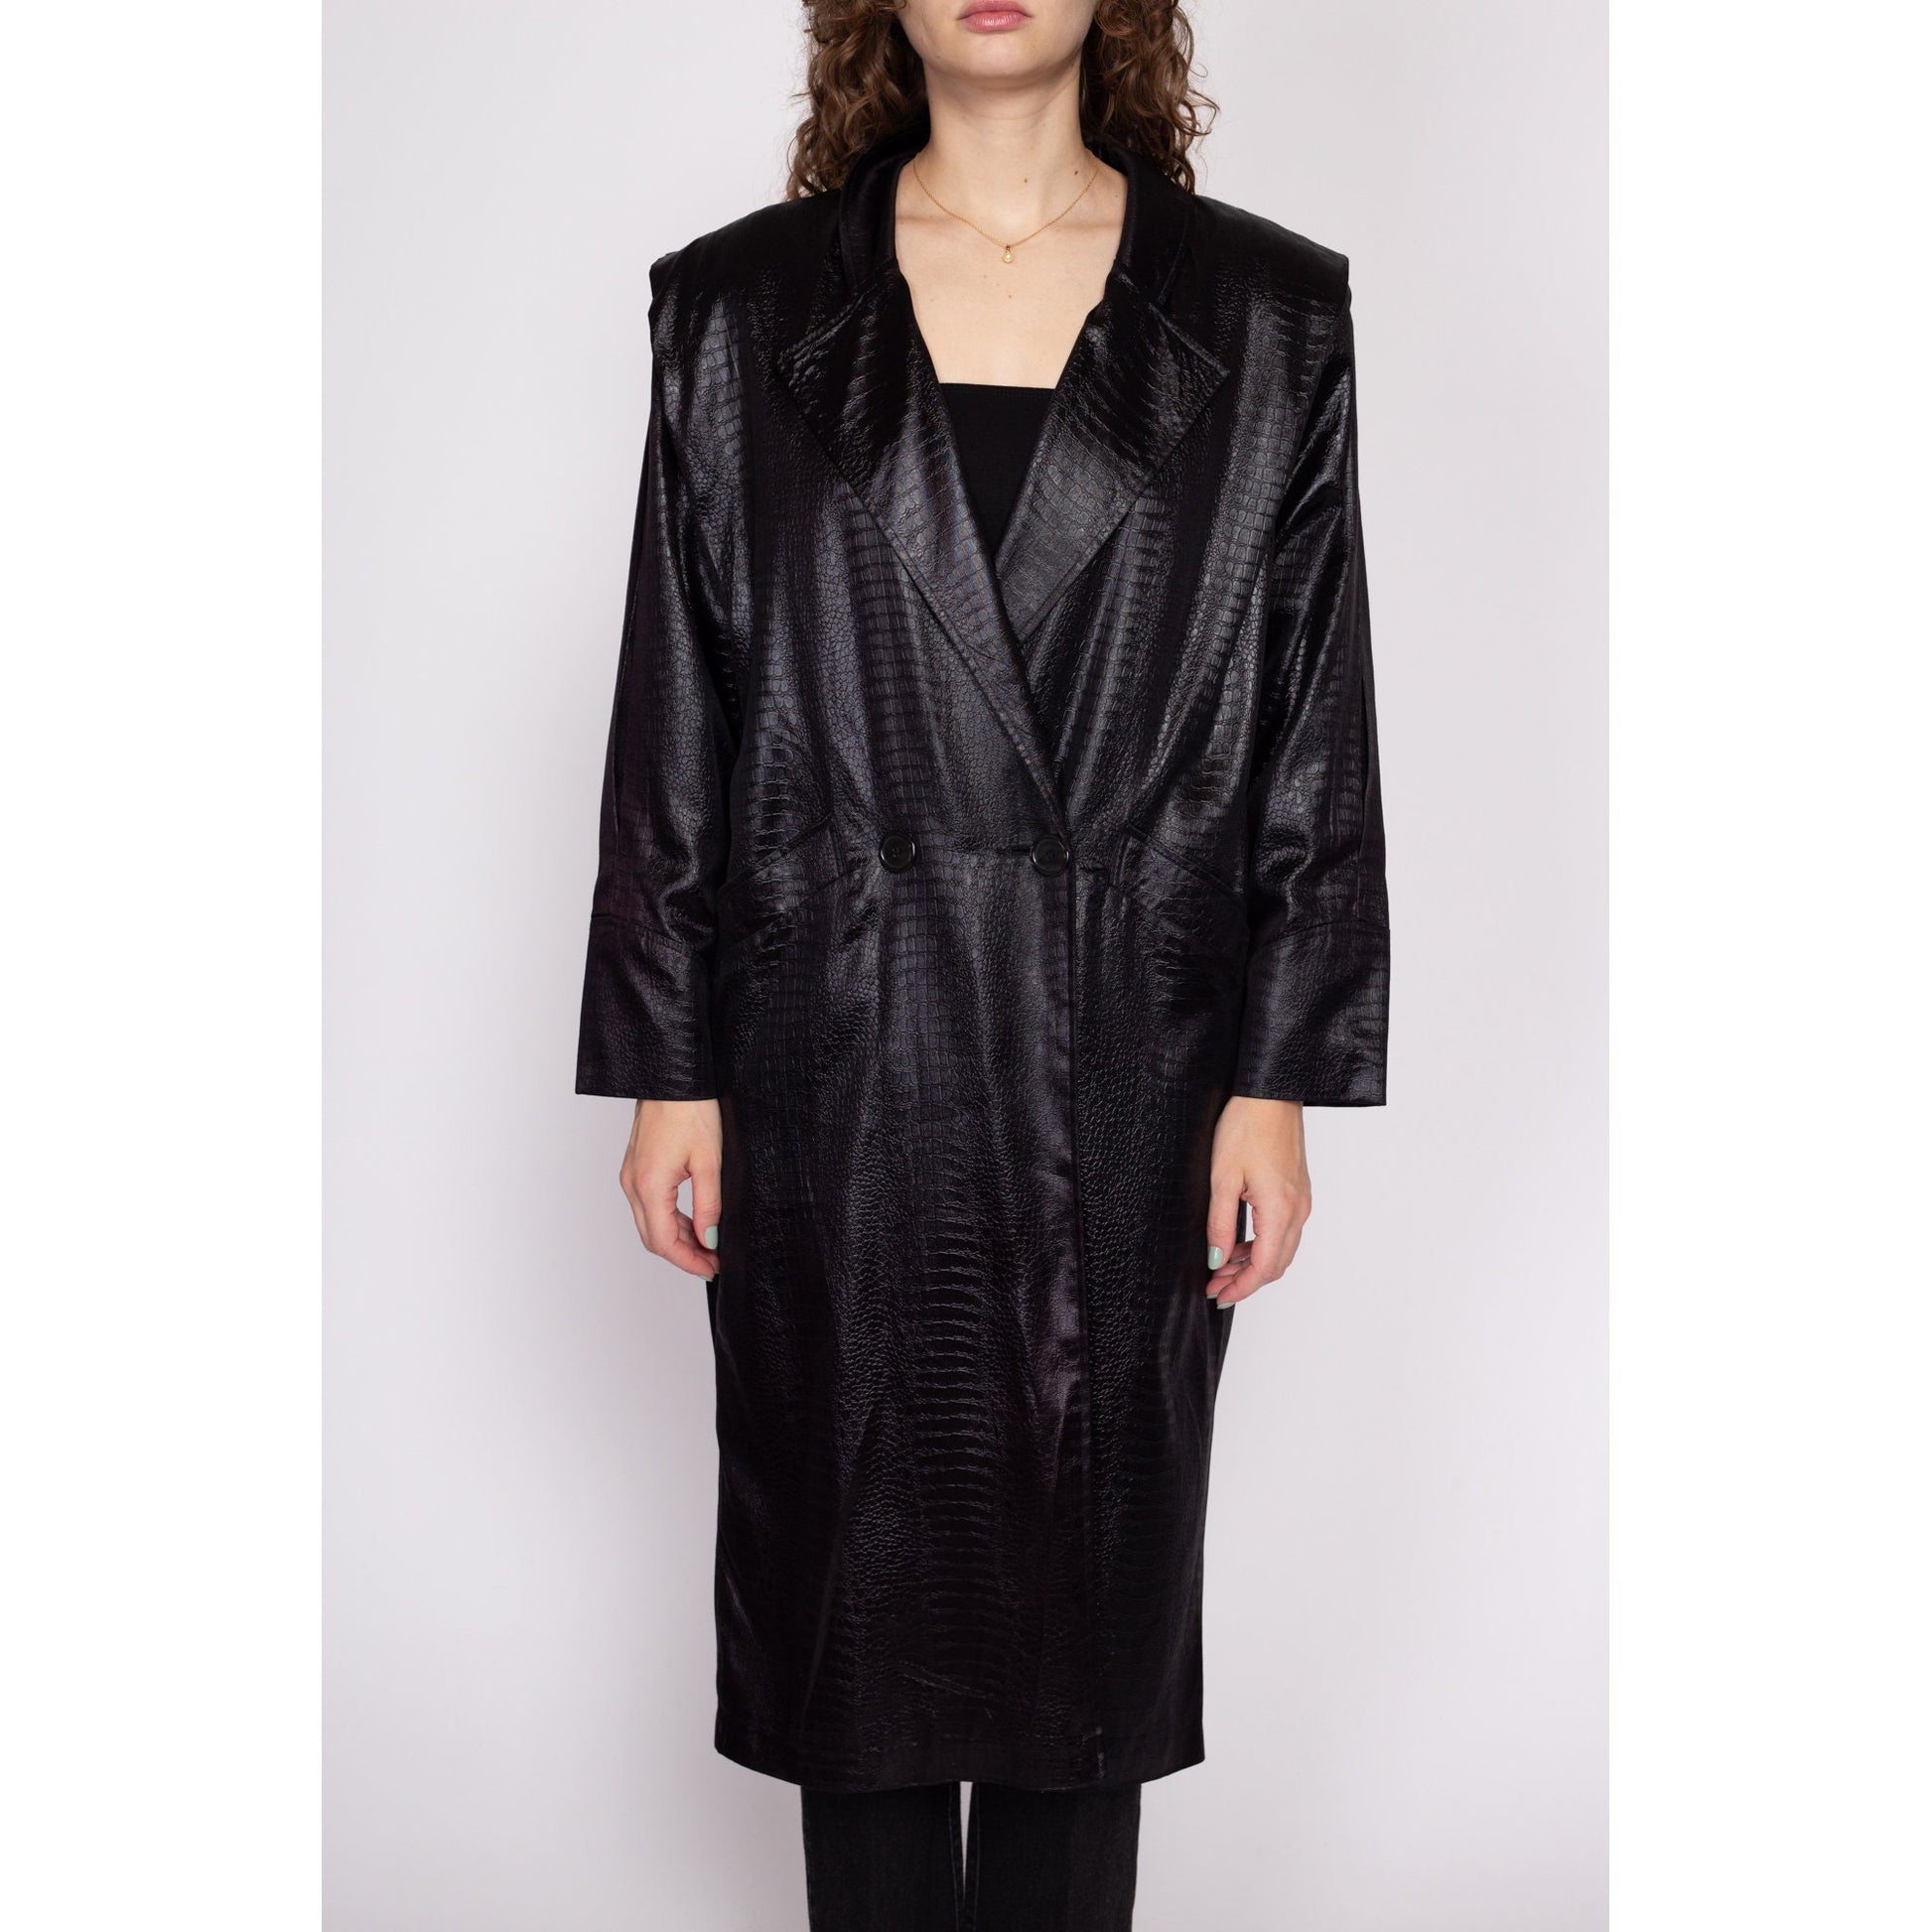 Flying Apple Vintage 80s Faux Crocodile Trench Coat